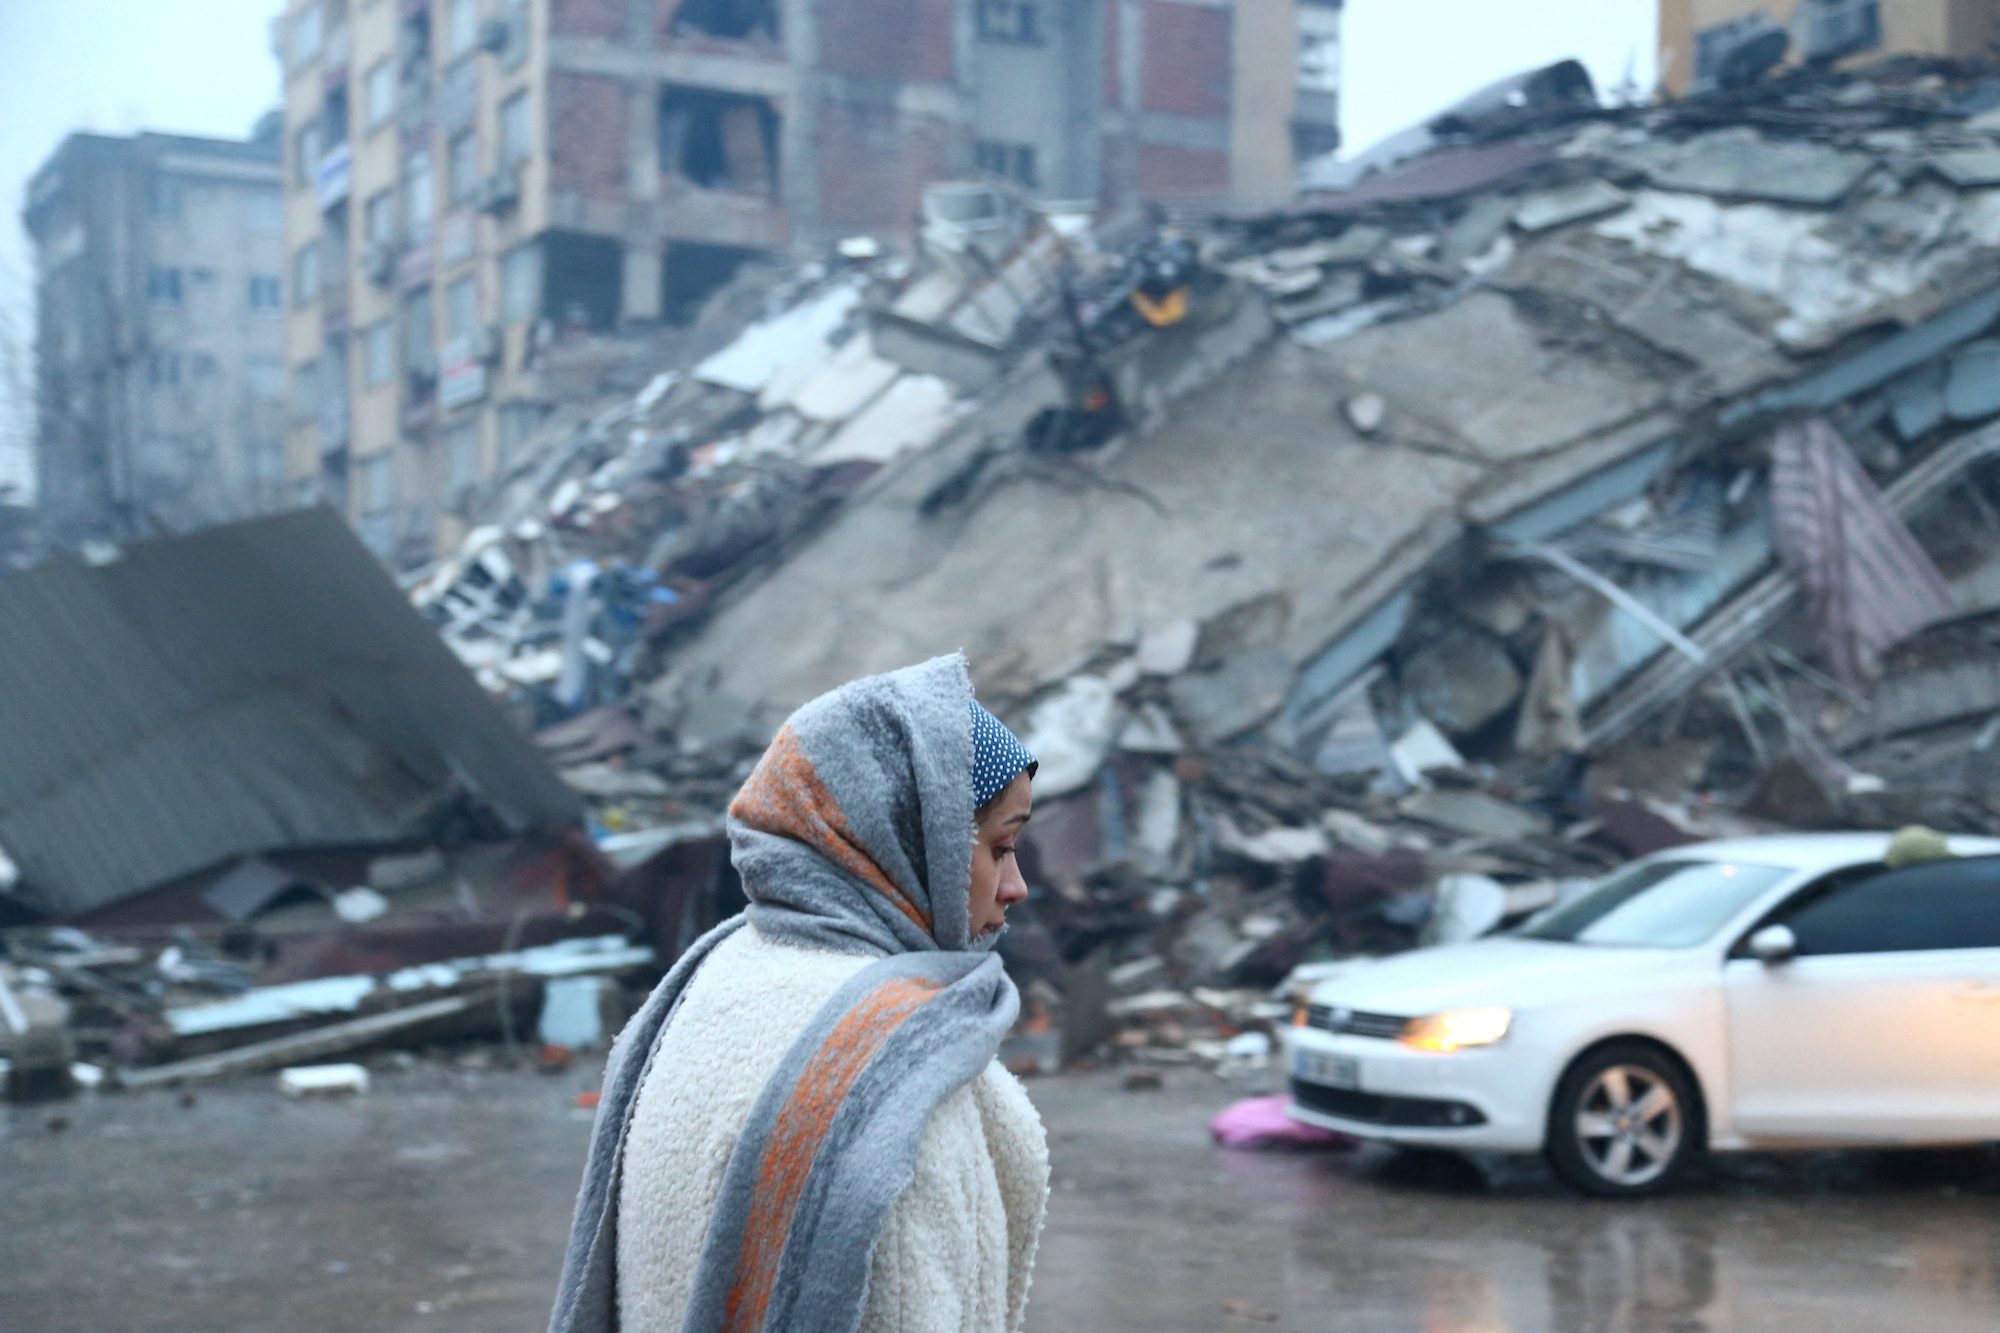 A woman stands near a collapsed building after an earthquake in Kahramanmaras, Turkey February 6, 2023. REUTERS/Cagla Gurdogan